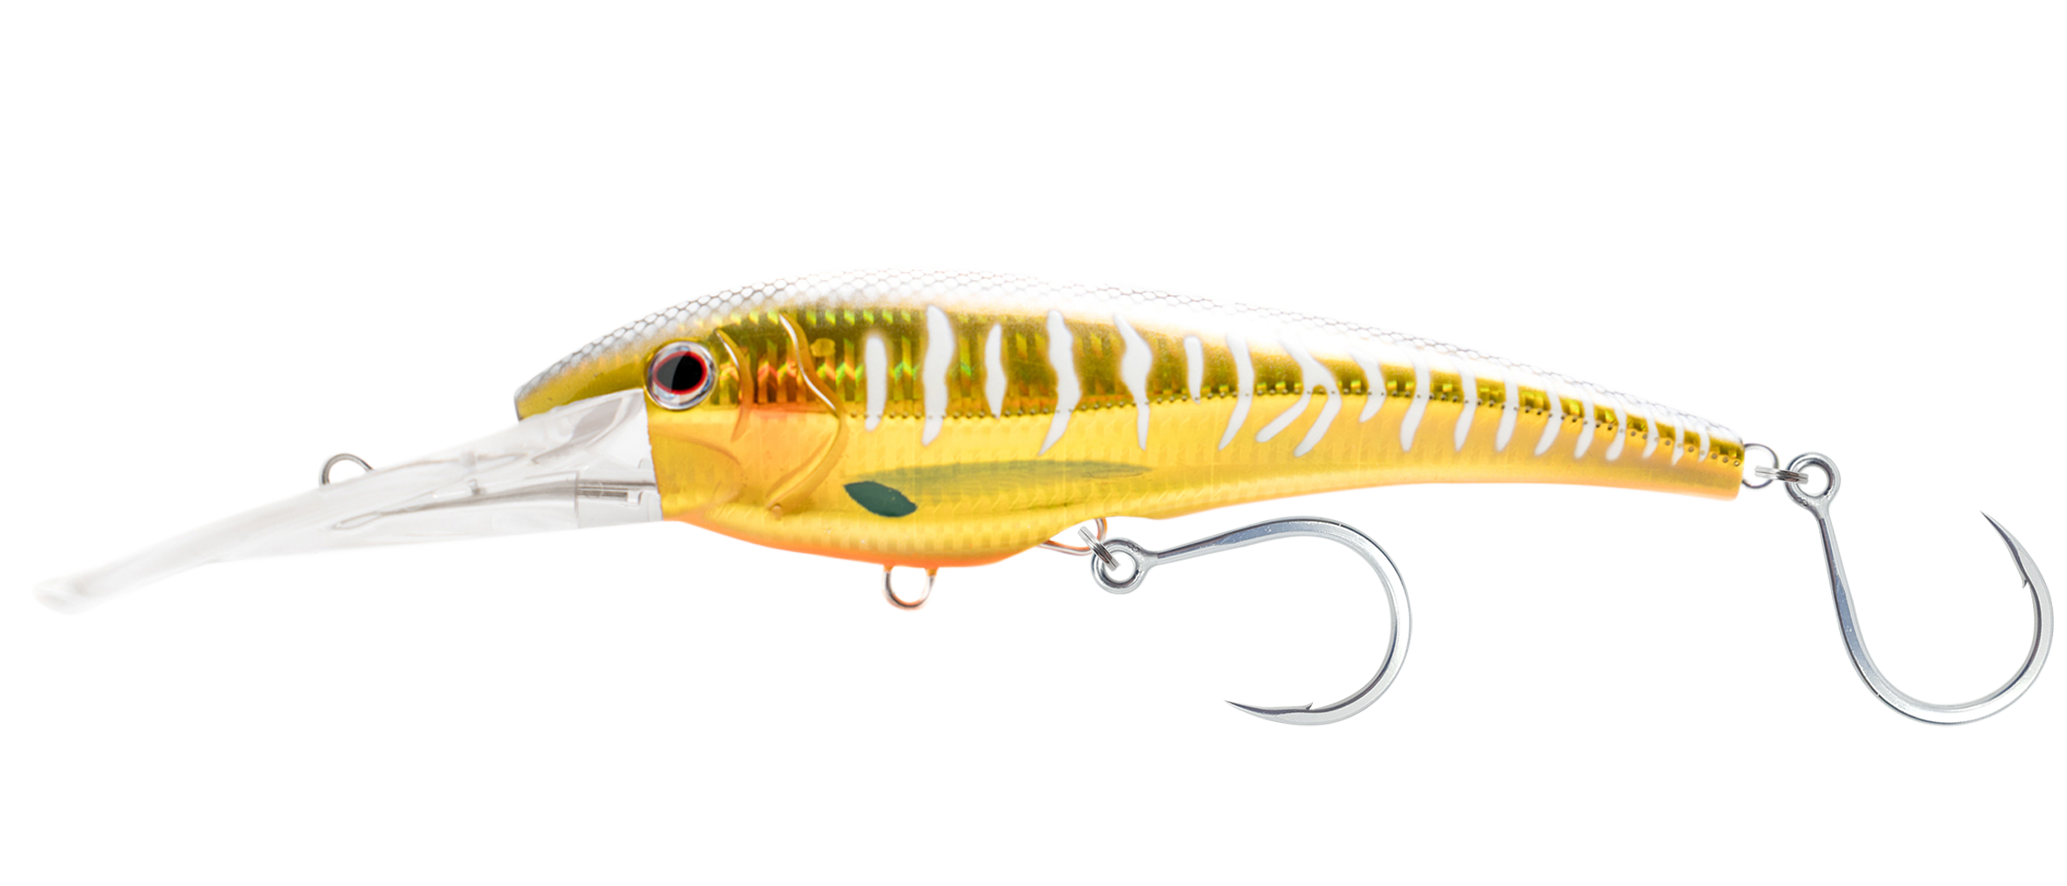 Nomad Design DTX Minnow 220 Long Range Special Sinking - 9 Inch